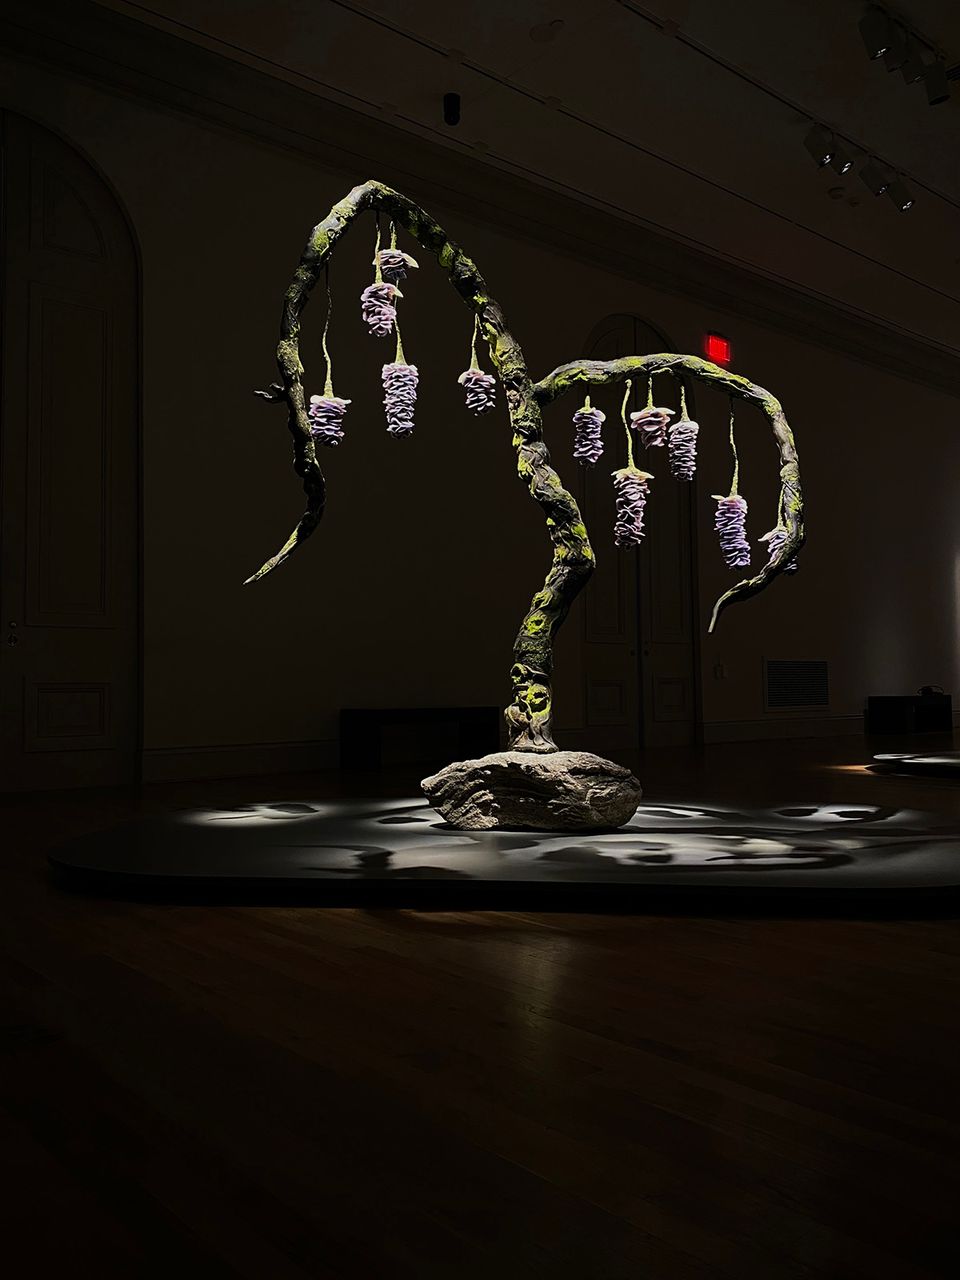 An installation photograph of a tree